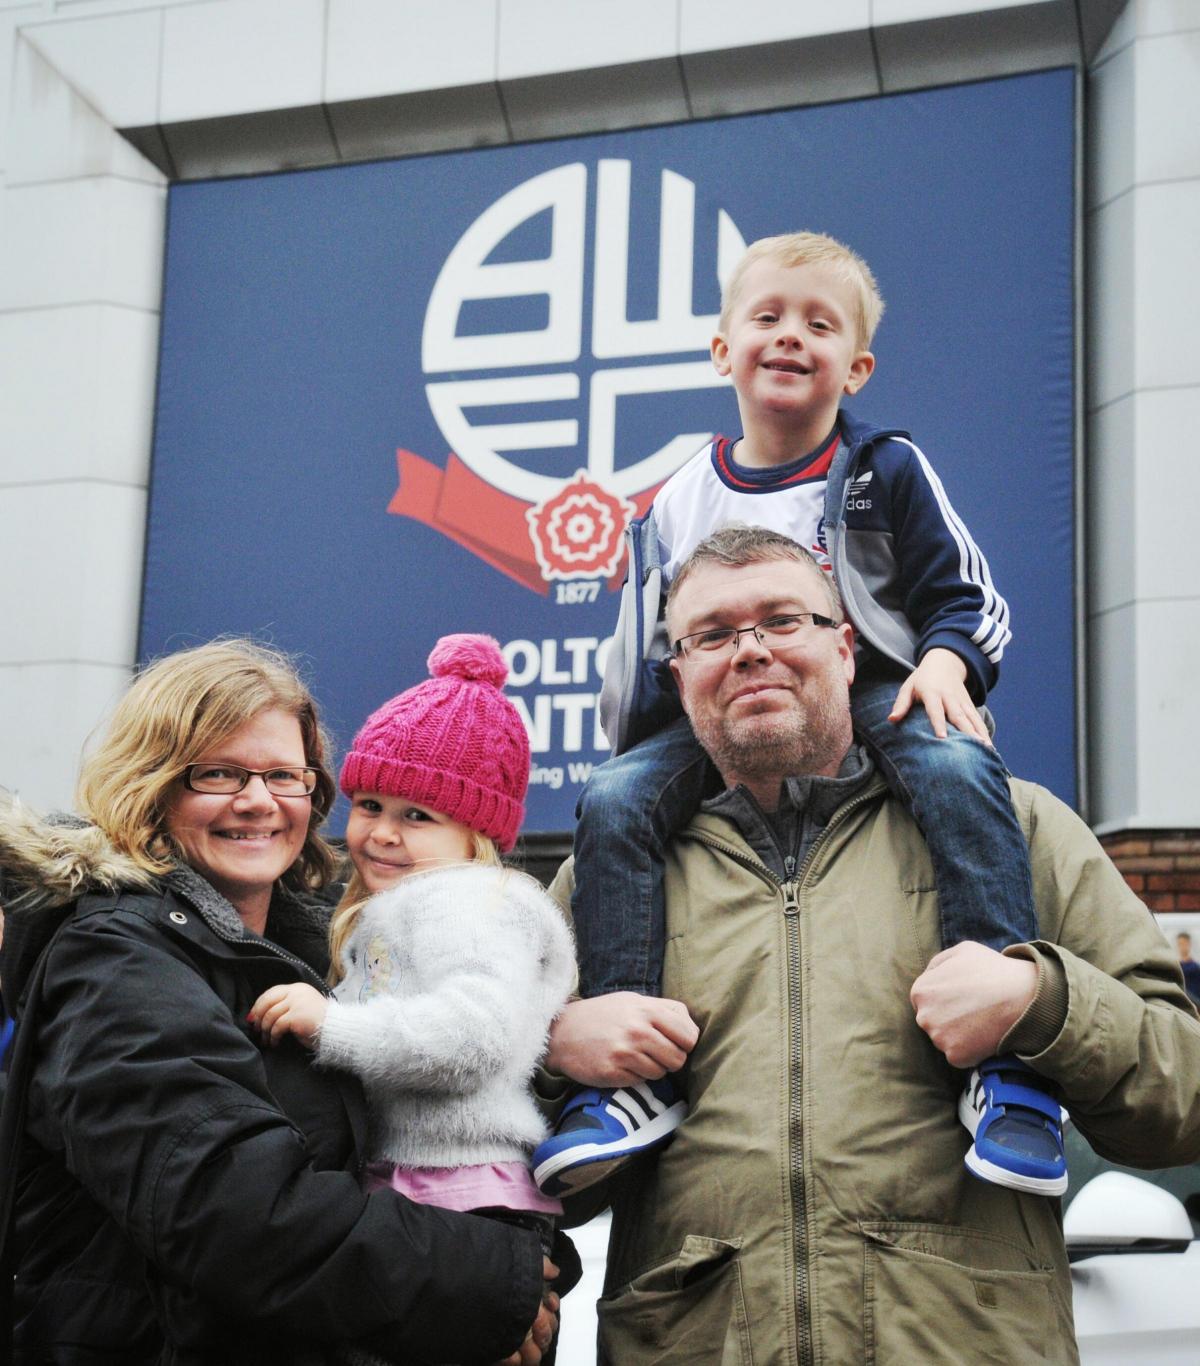 Bolton Wanderers fans at the Macron Stadium ahead of the 1-0 victory over Blackburn Rovers